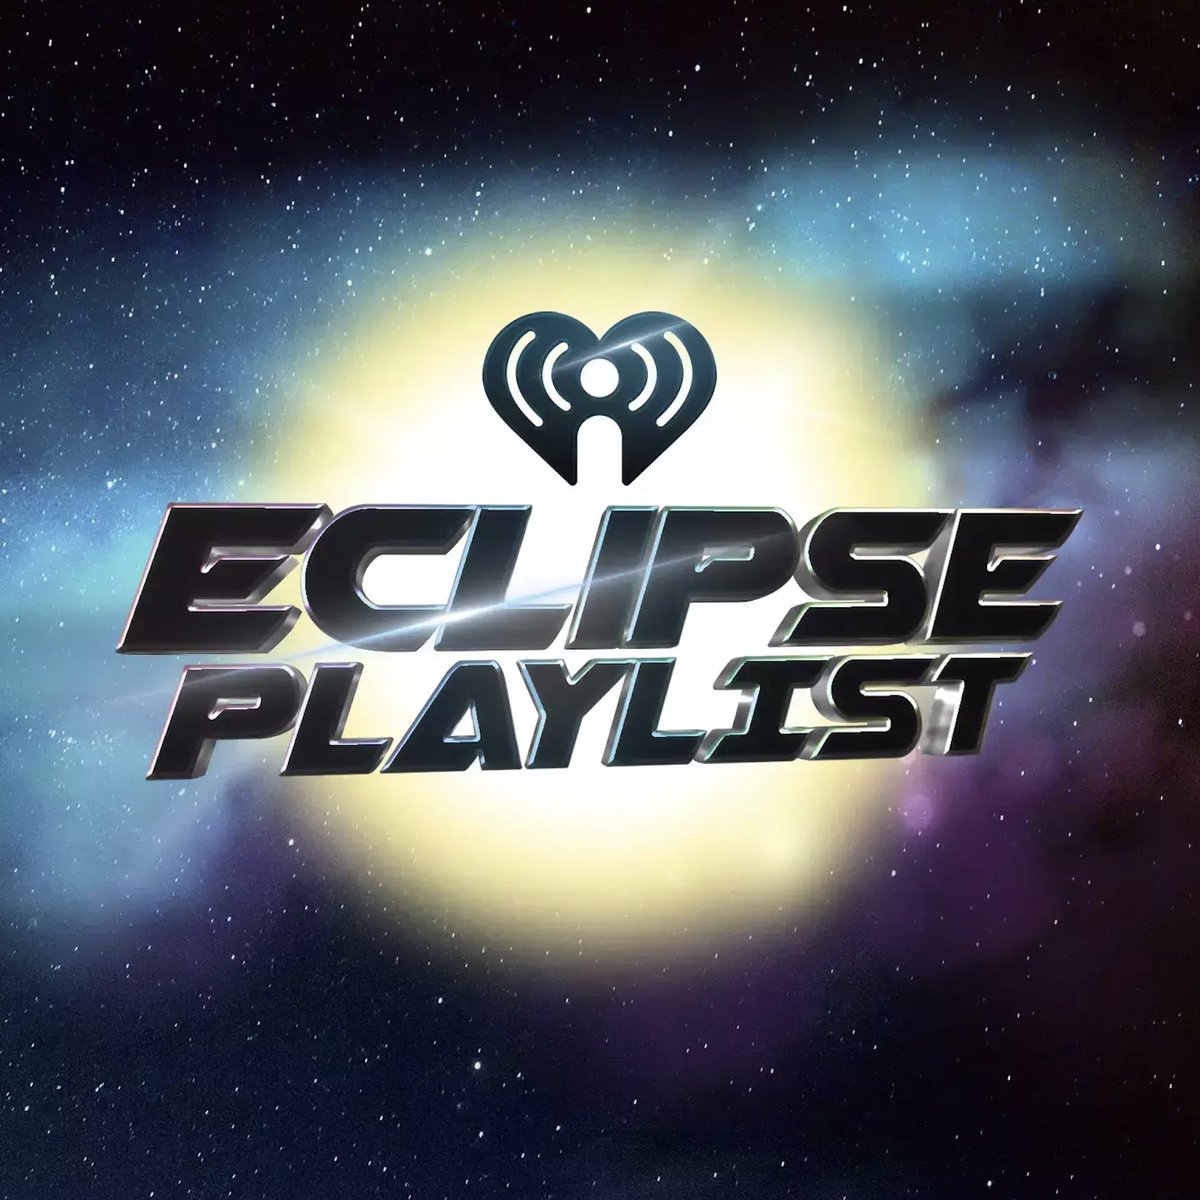 Happy #Eclipse day! ☀️🌙 Get your @iHeartRadio Eclipse playlist HERE ➡️ ihe.art/P2CKAt4